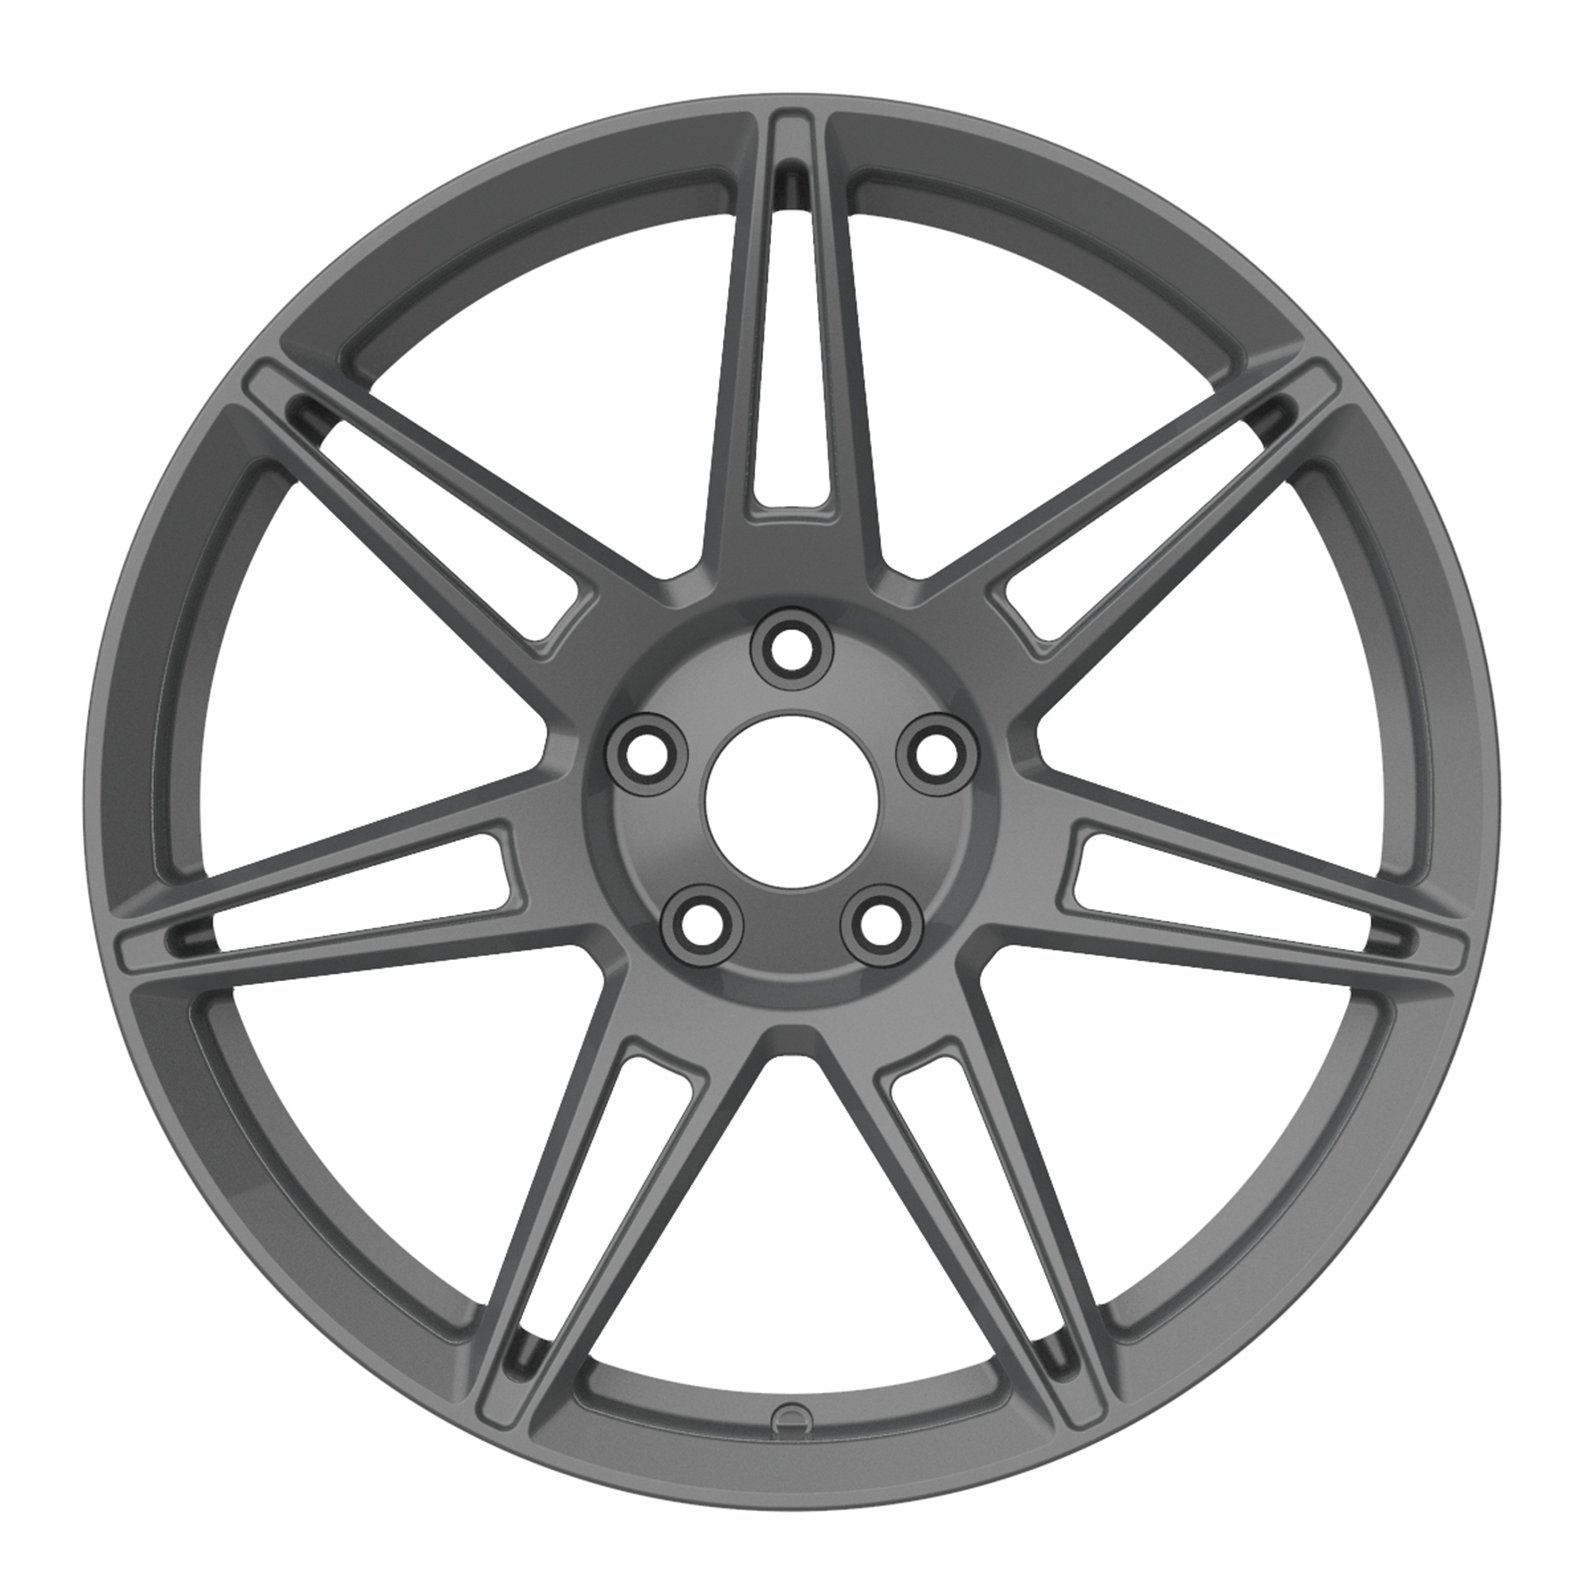 M7R FORGED MUSTANG GT PP 5.0 20X10 20X11 - Wheel Designers